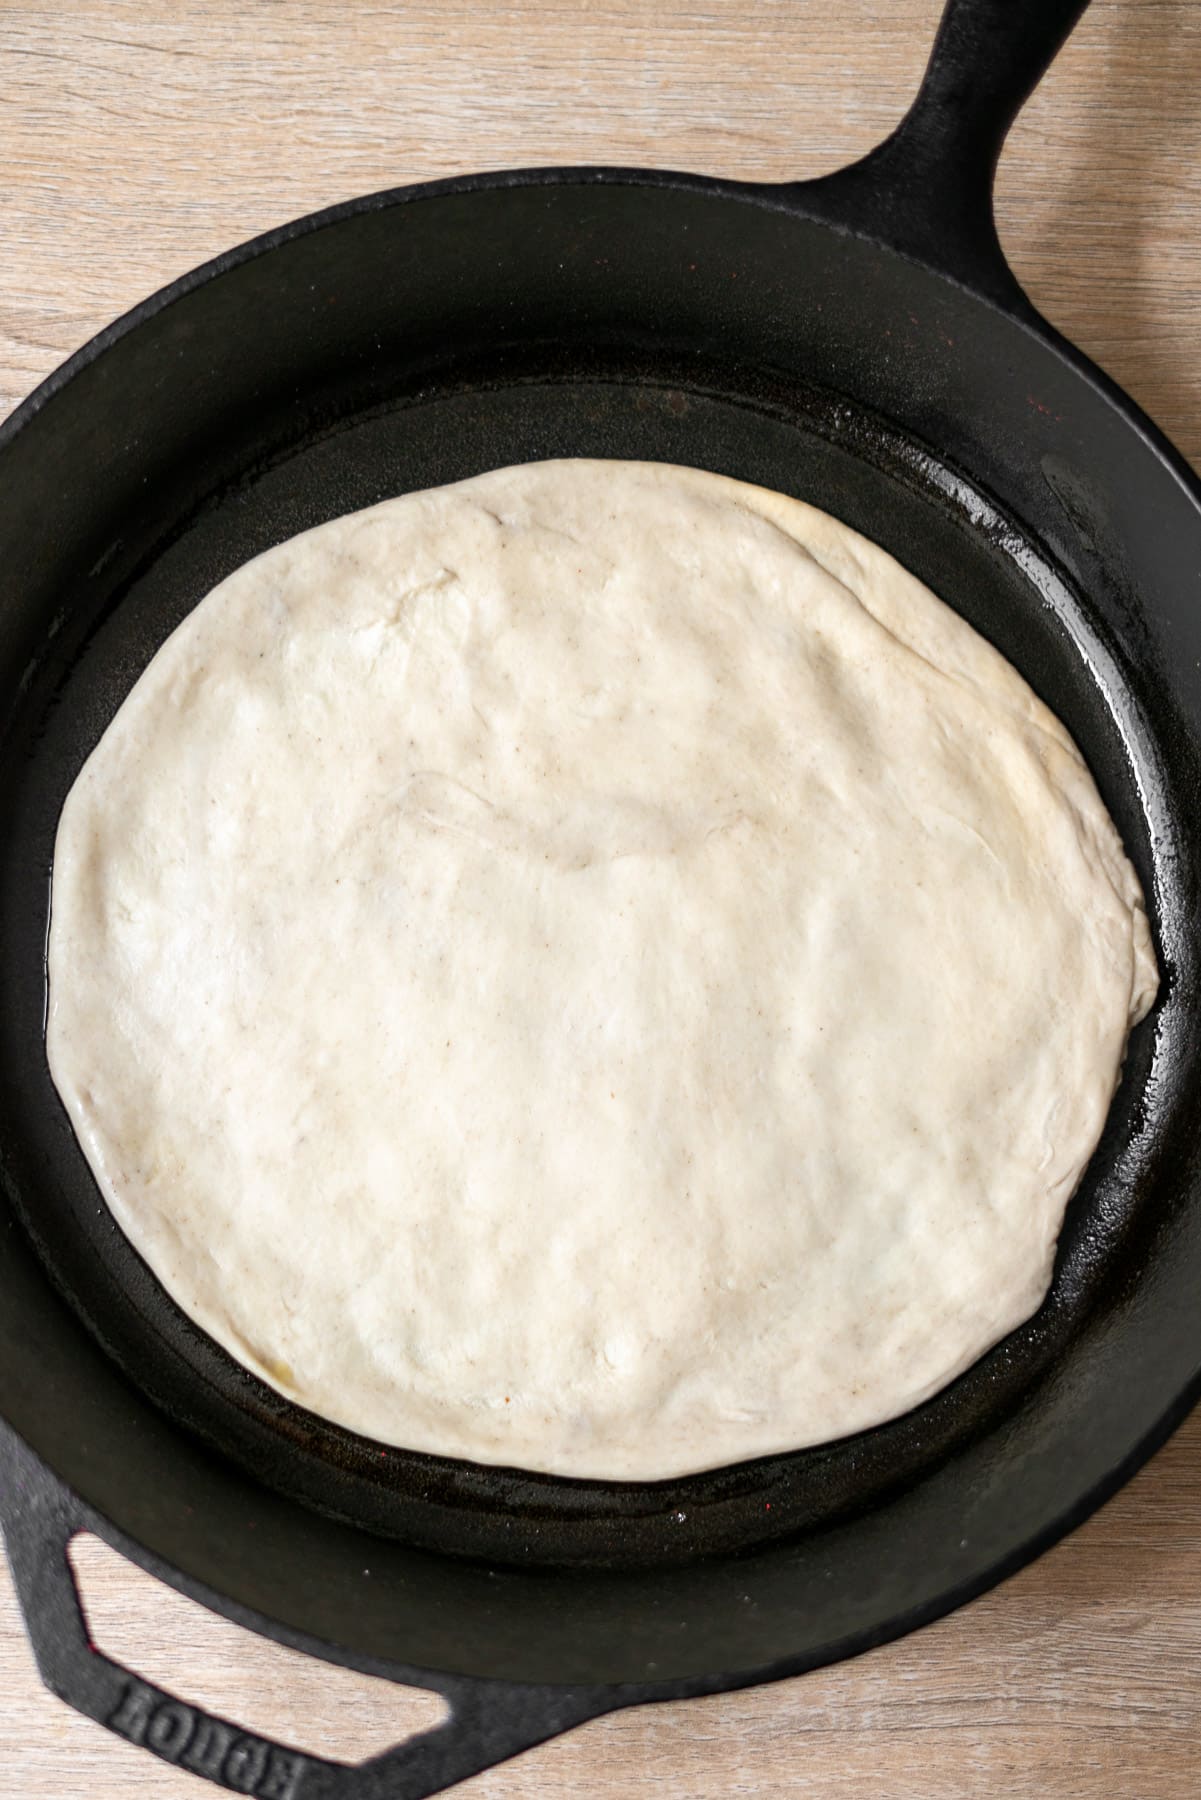 unbaked pizza dough shaped in a lodge cast iron pan